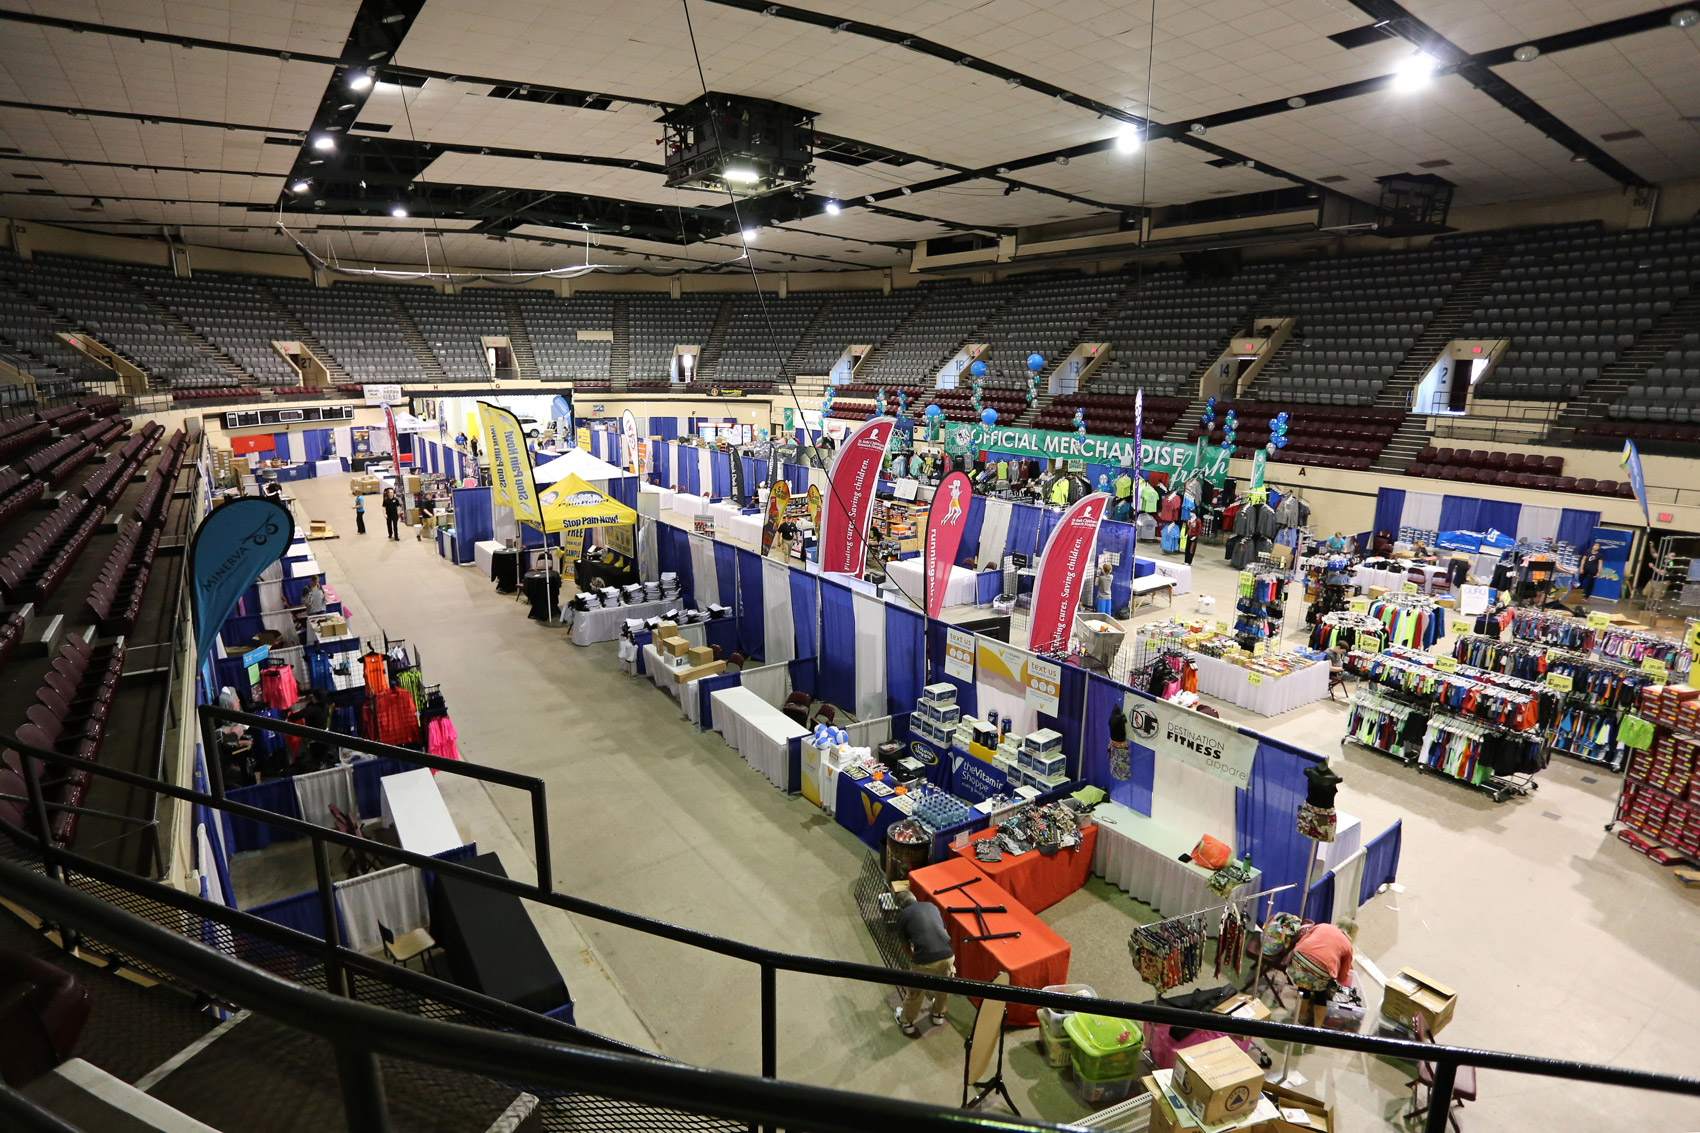 Several rows of vendor booths at the DECC arena from a ceiling perspective